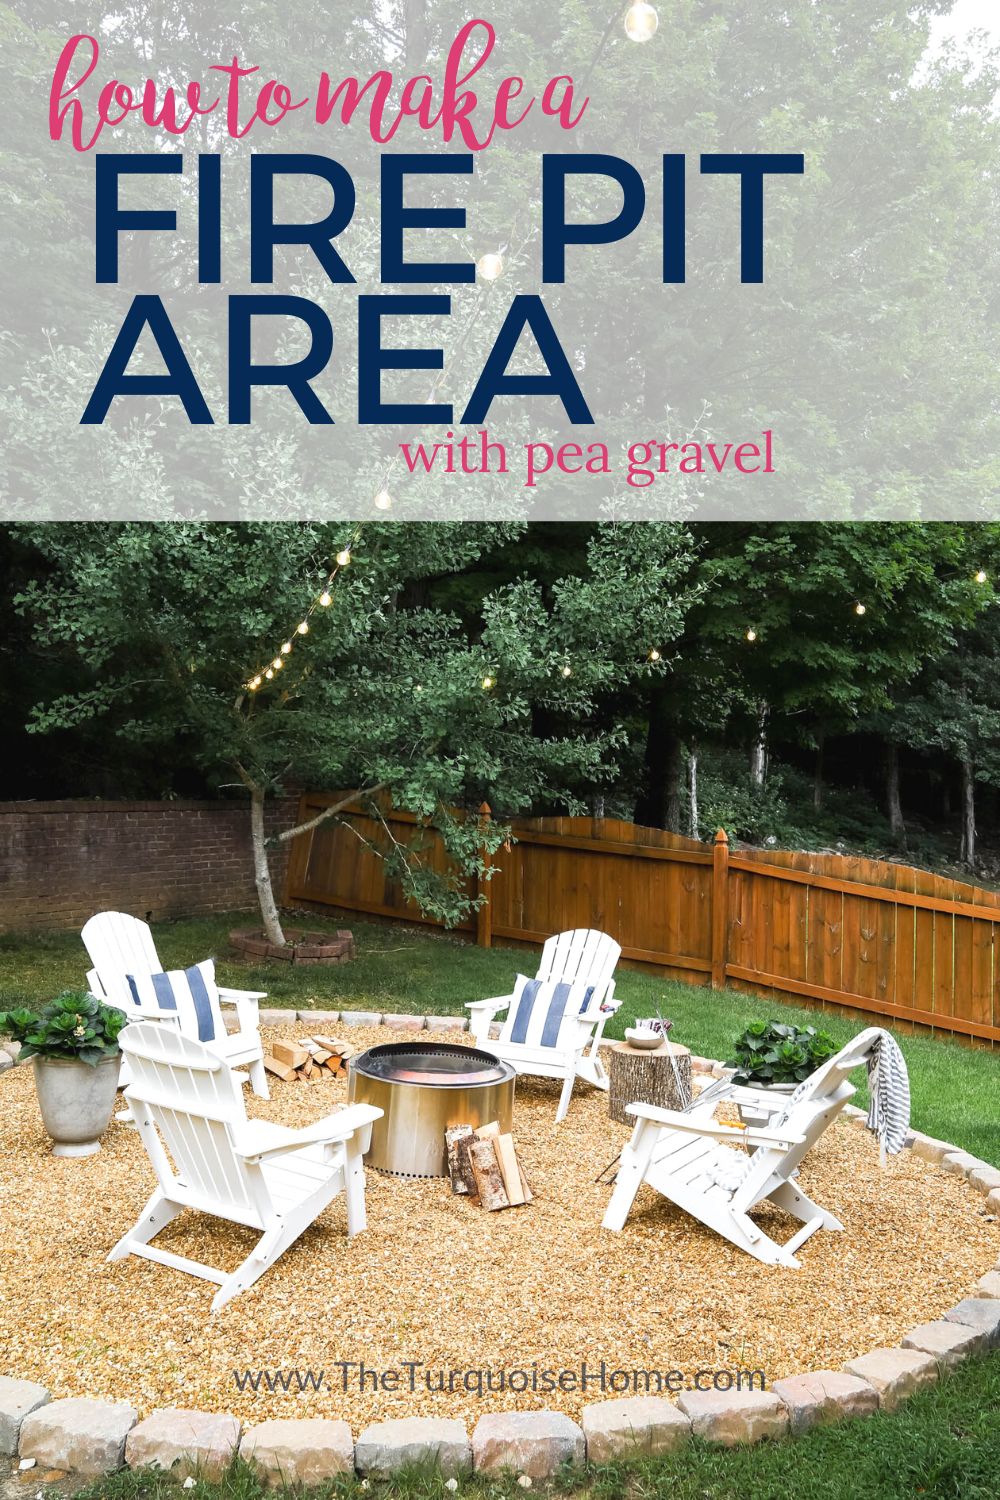 How to make a fire pit area tutorial